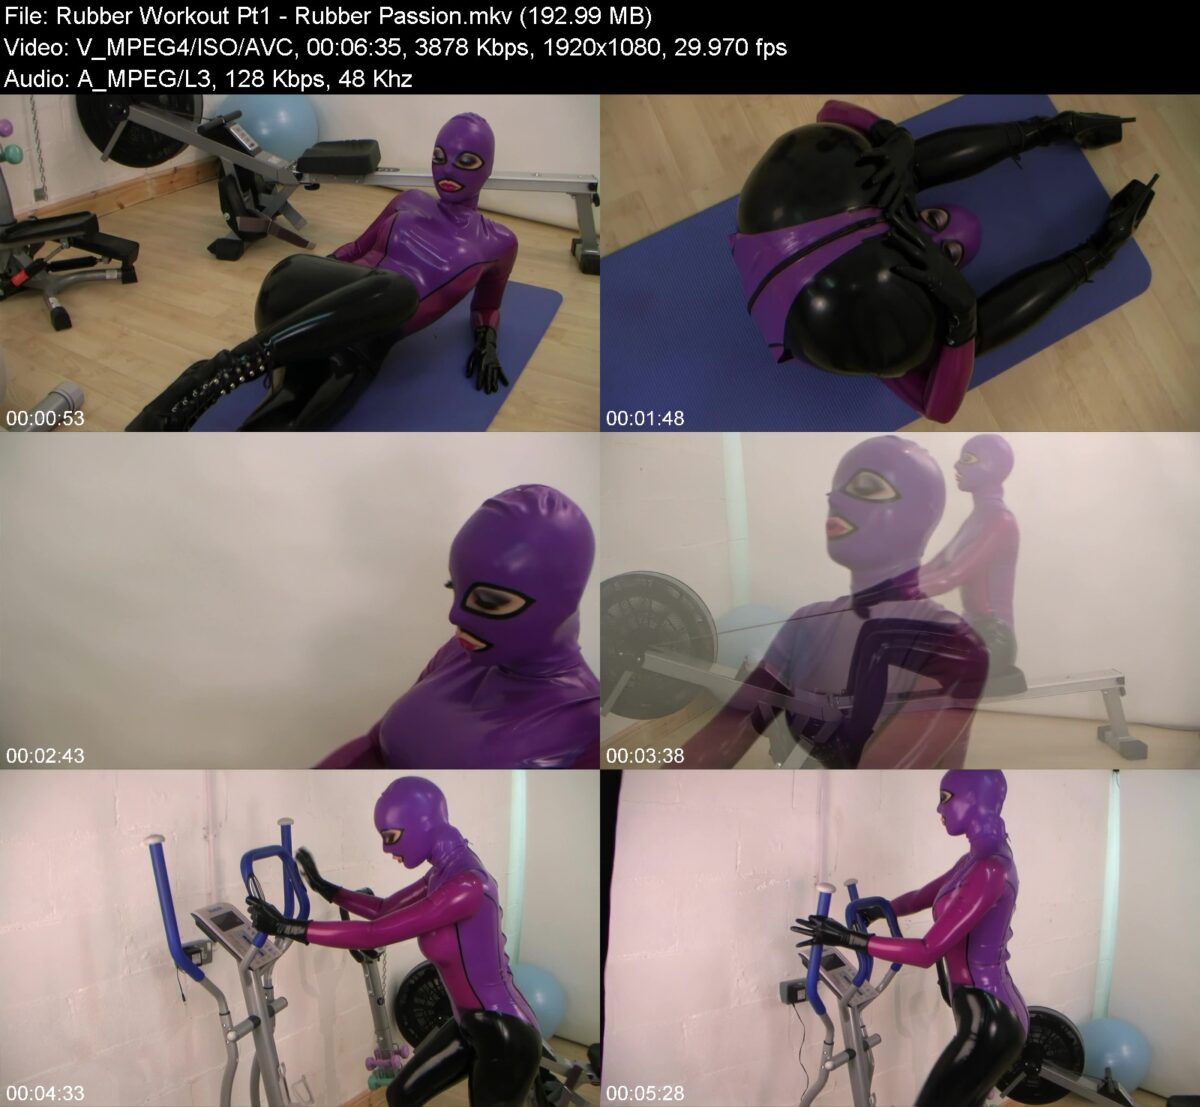 Actress: Rubber Workout Pt1. Title and Studio: Rubber Passion